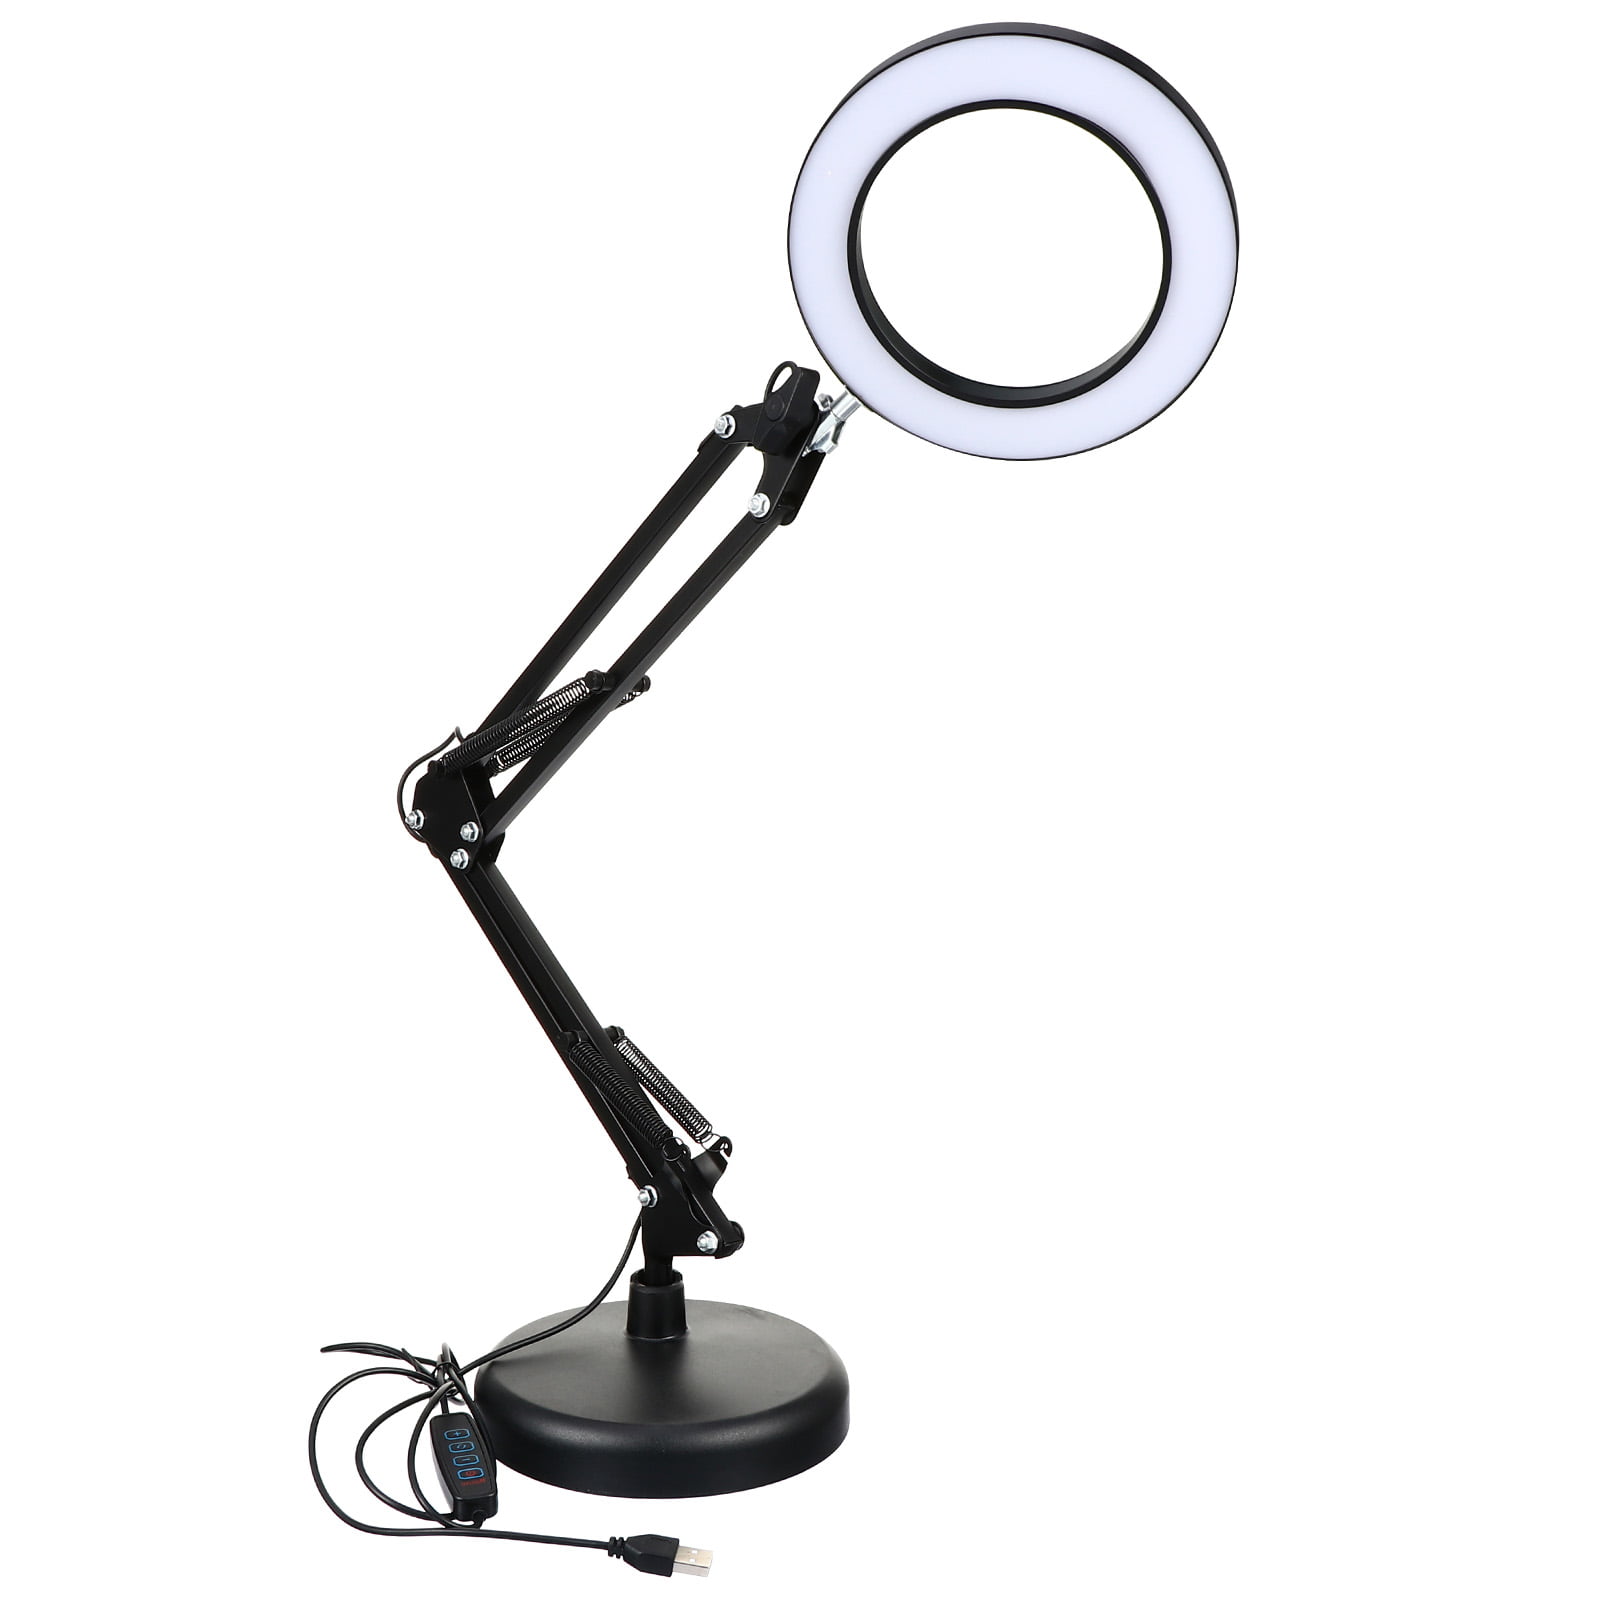 LED Illuminated Desktop Magnifying Glass 8X Electronic PCB Soldering Magnifier